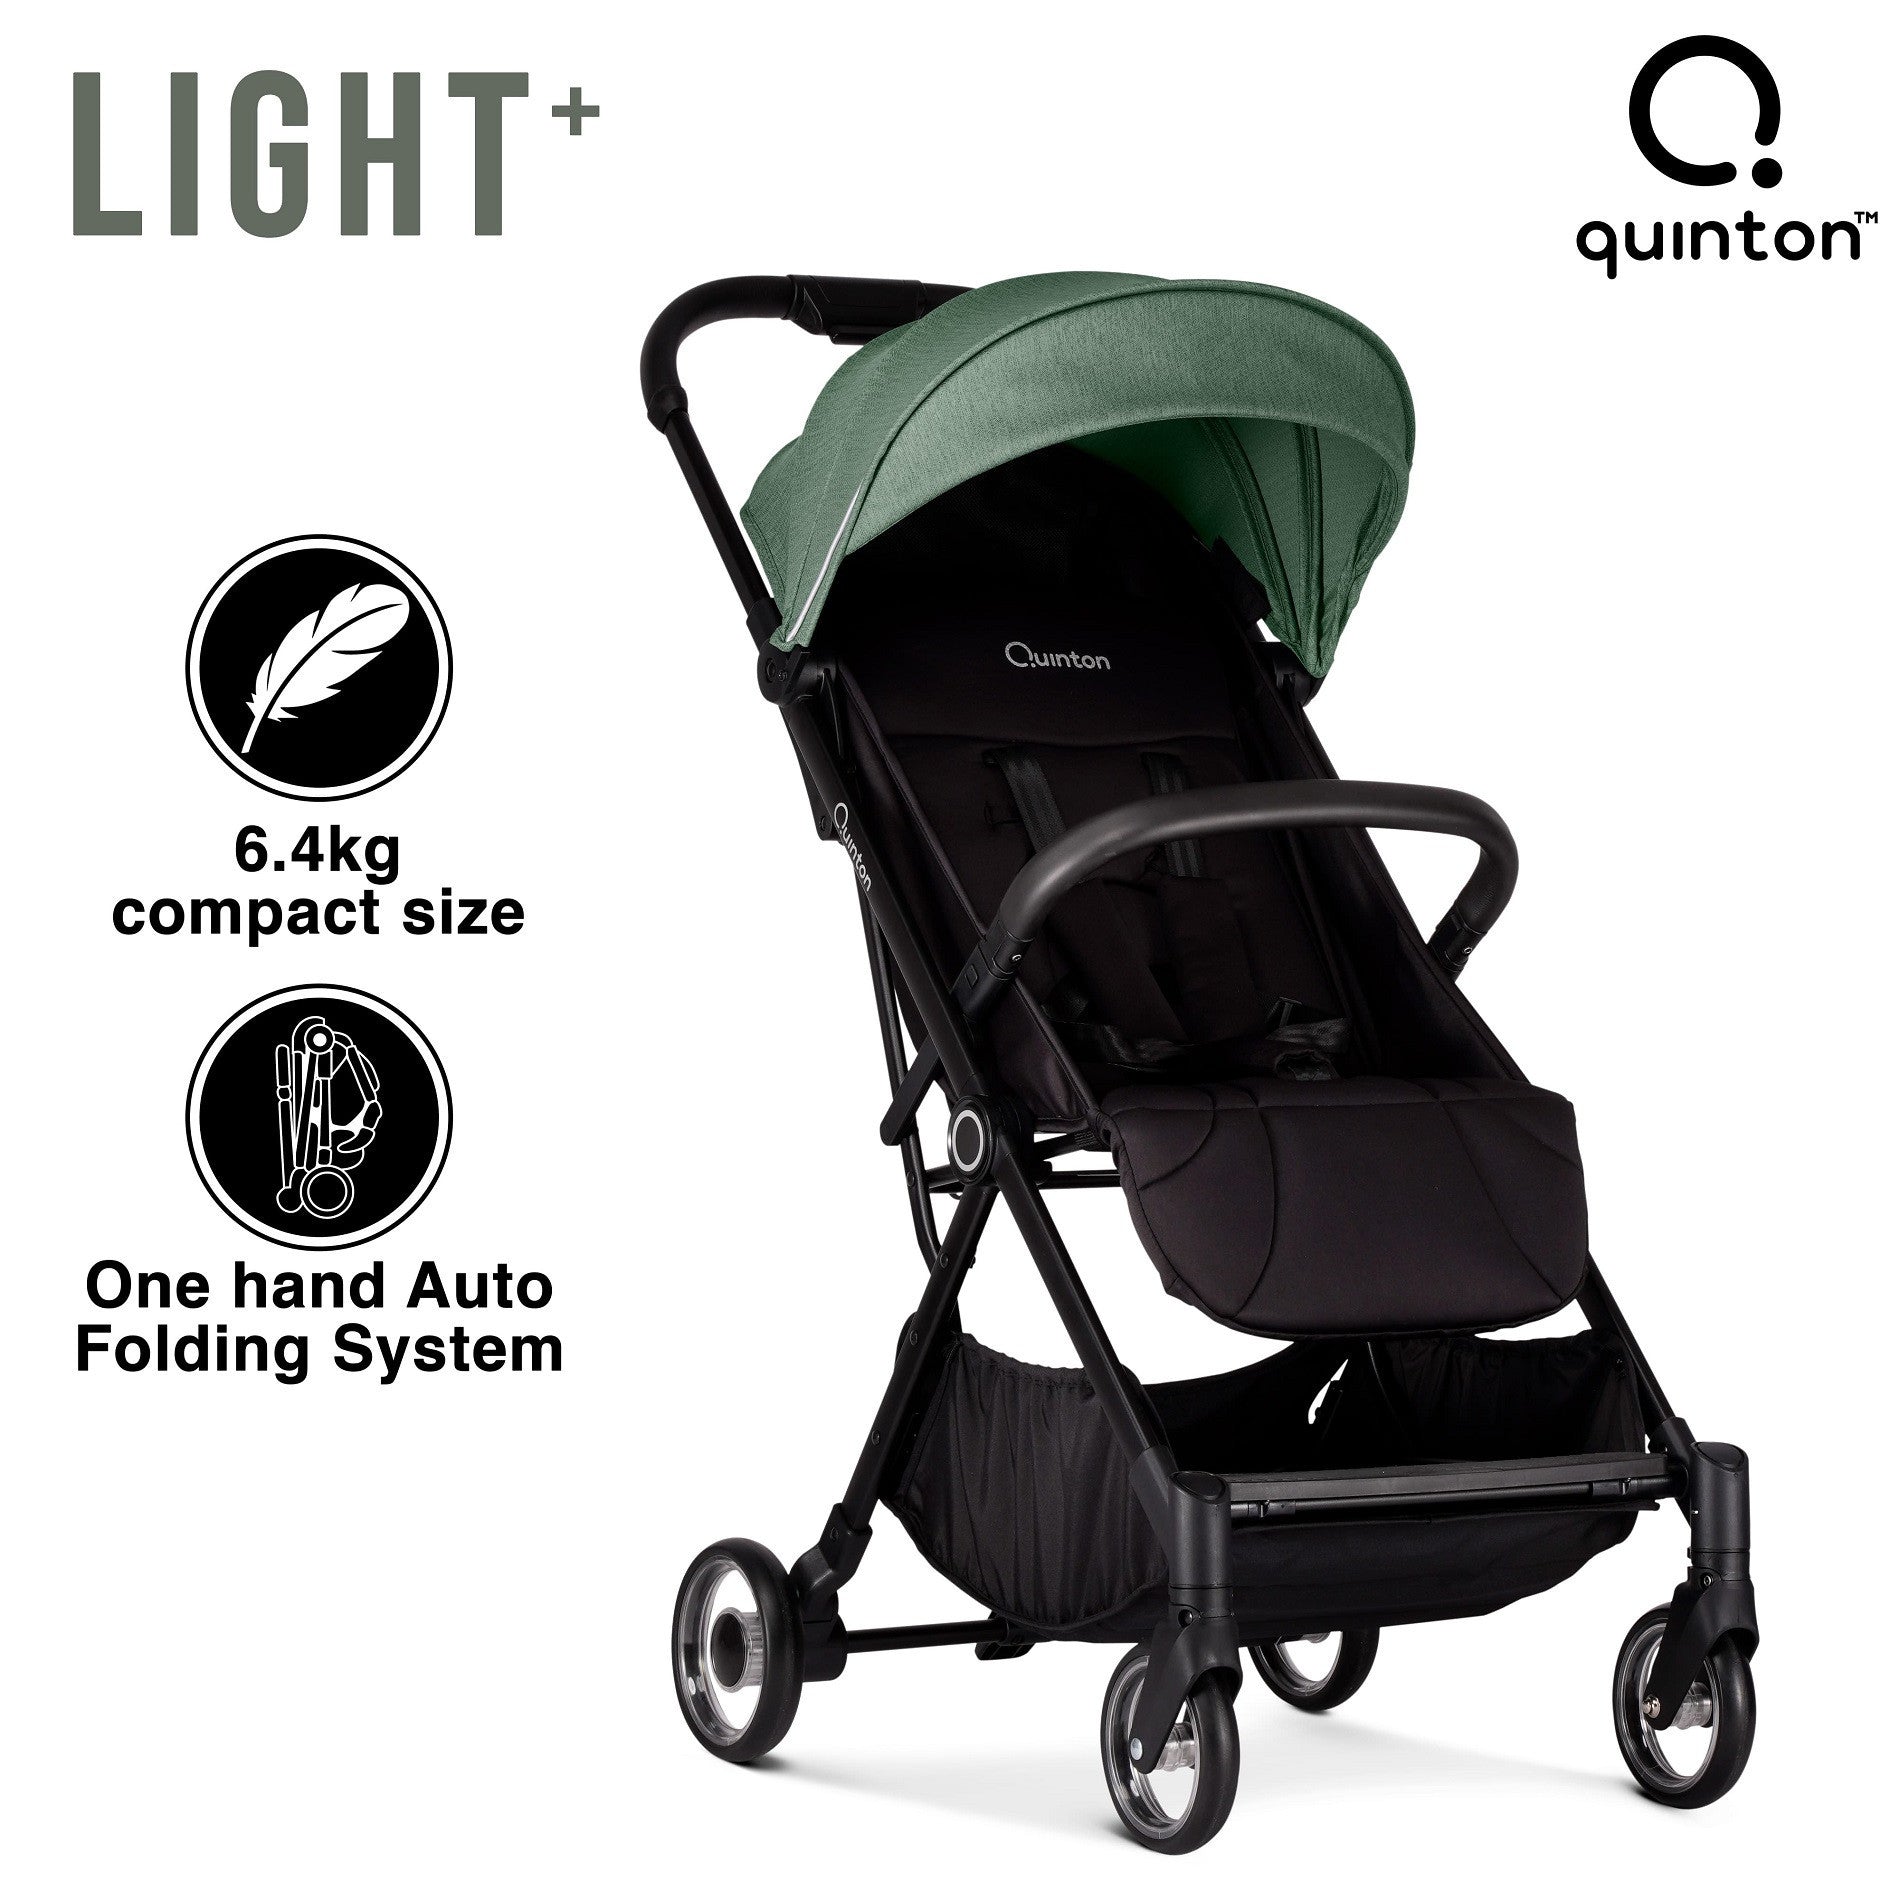 Quinton Light+ Fold Plus Baby Stroller, Easy Auto Folding System, Steel Frame, Suitable For Newborn Baby to 25kg